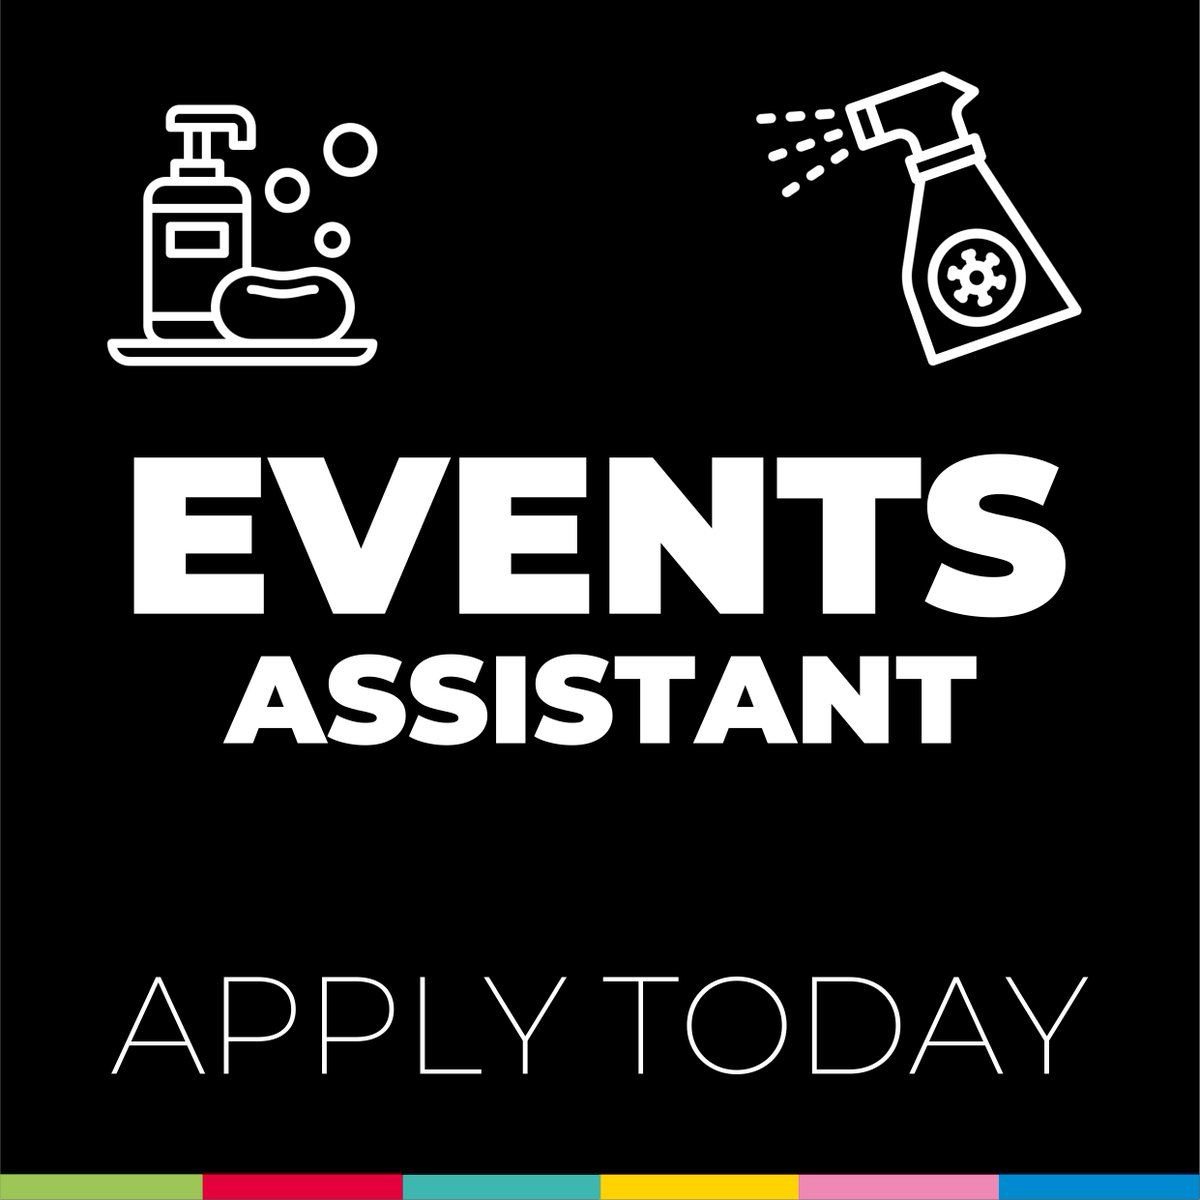 🚨Job Alert🚨 We are looking for an enthusiastic and experienced Events Assistant to join our friendly team here at The Old Town Hall. 🌐 ow.ly/AWf150HuNSv ⏰ Closing Date: Midnight, Sun 23 Jan 2022 #hemel #theatre #dacorum #Jobs #artsjobs